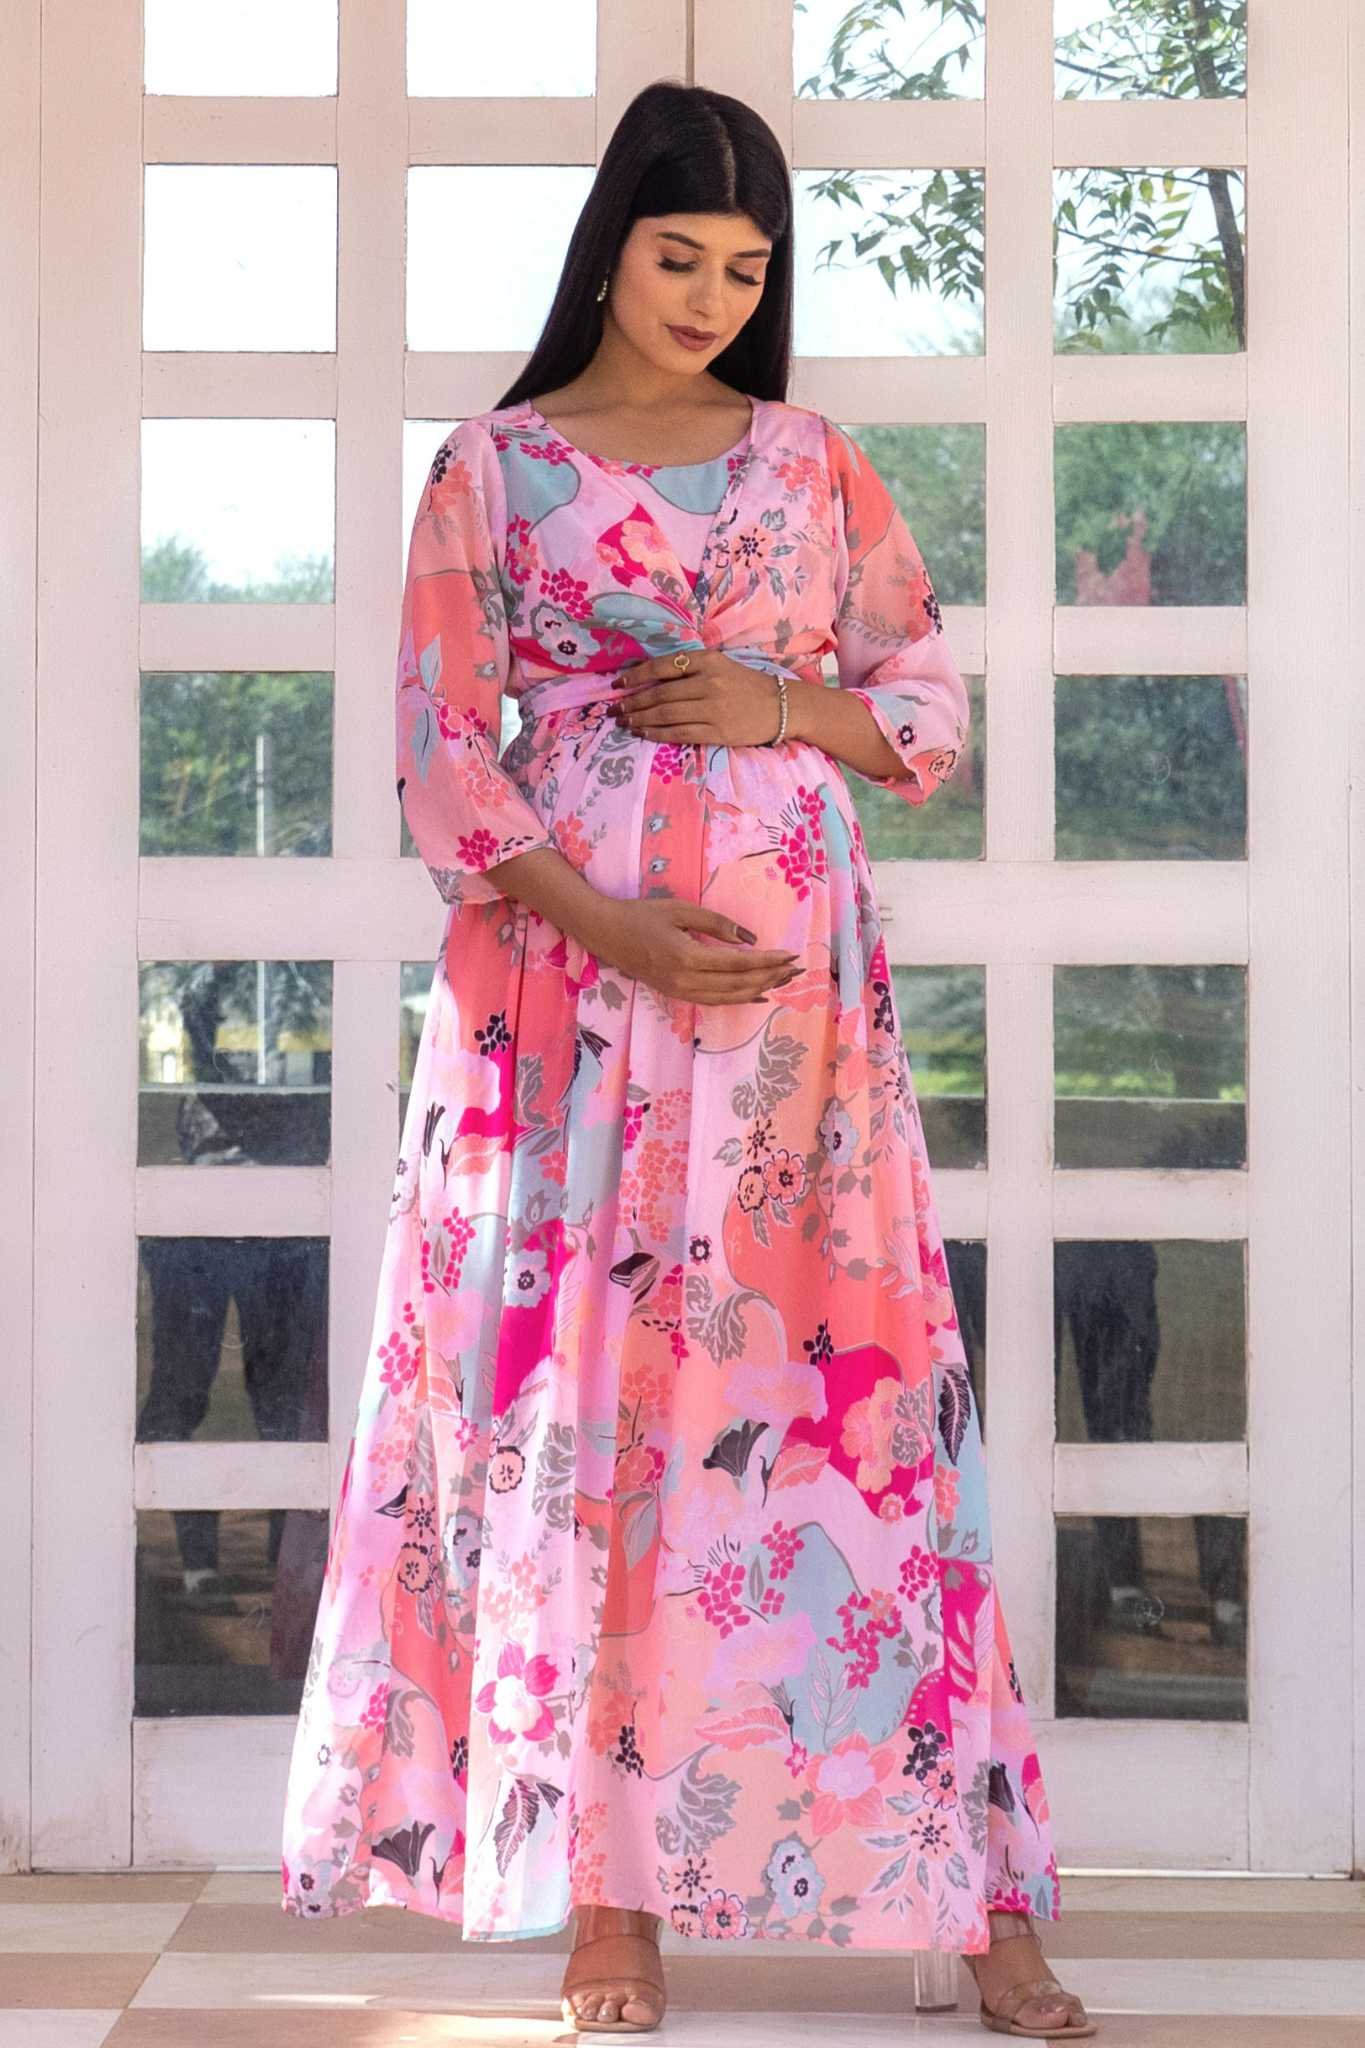 Attractive Cotton Printed Maternity Gown For Women at Rs 1419.00 | Pregnancy  clothes, Pregnancy wear, Maternity fashion - thedressing, Kota | ID:  2849777854091